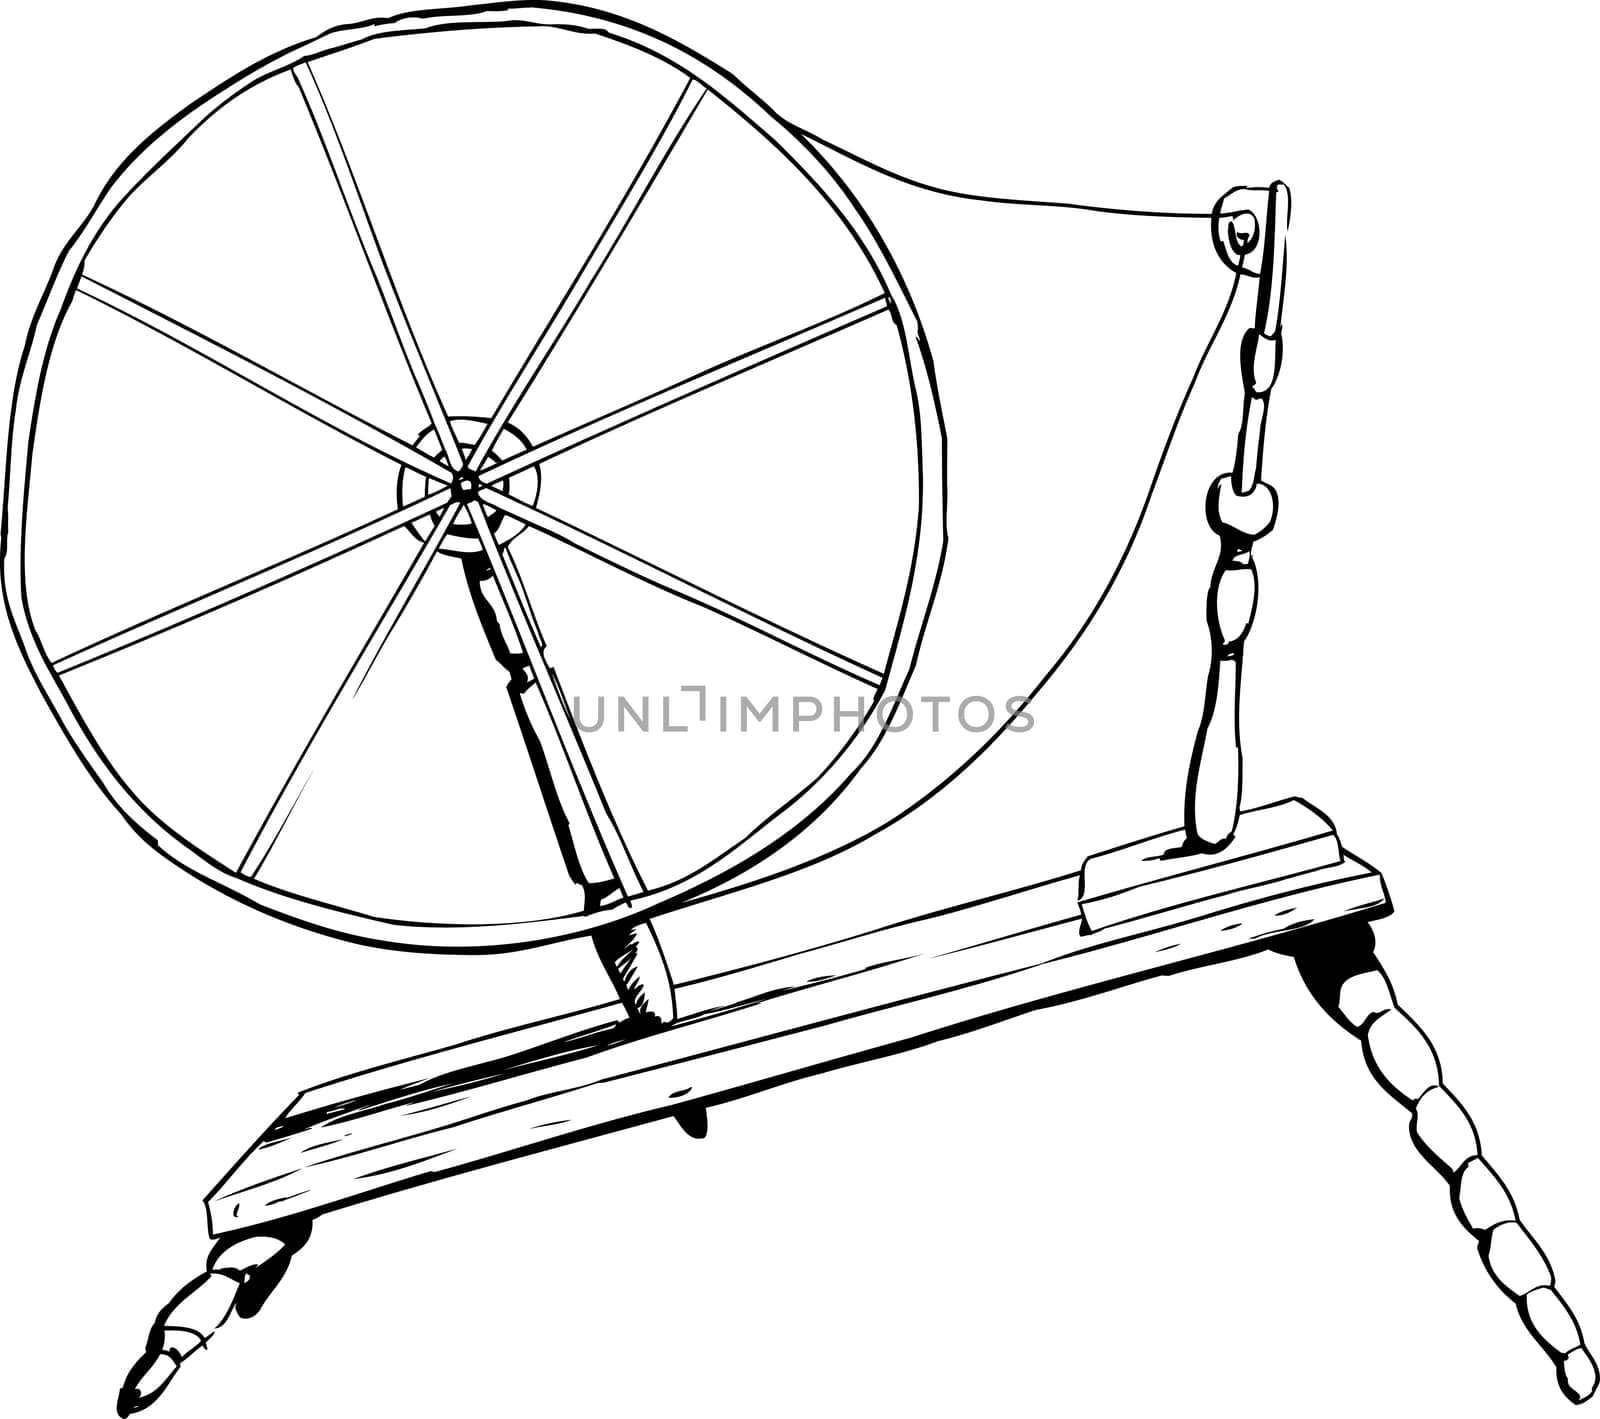 Outlined side view on single old fashioned wooden 18th century era textile spinning wheel